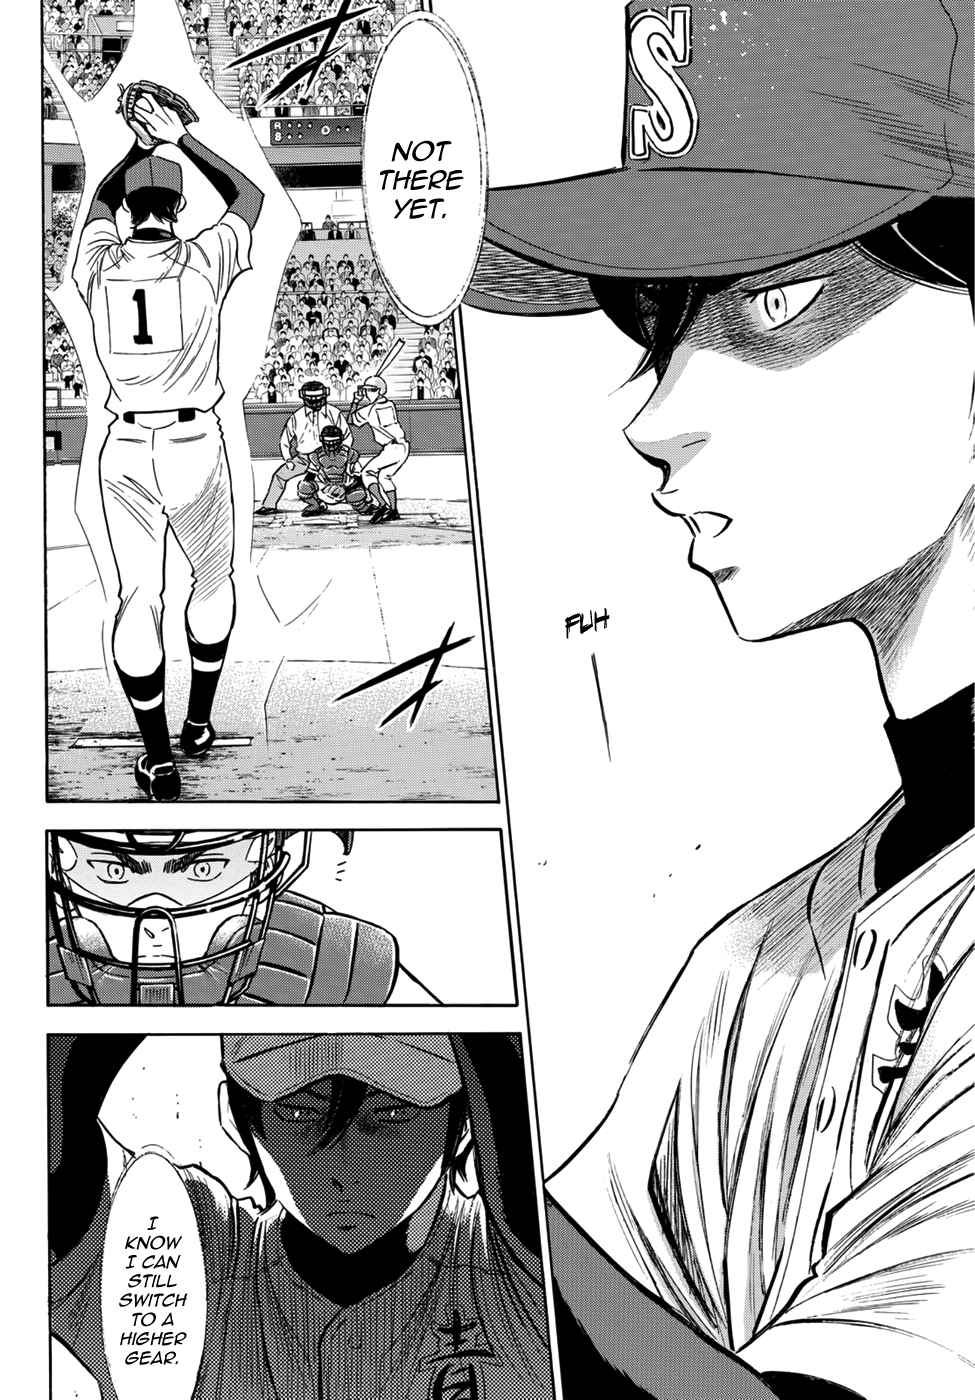 Diamond no Ace Act II Vol. 4 Ch. 30 At the End of the Gaze